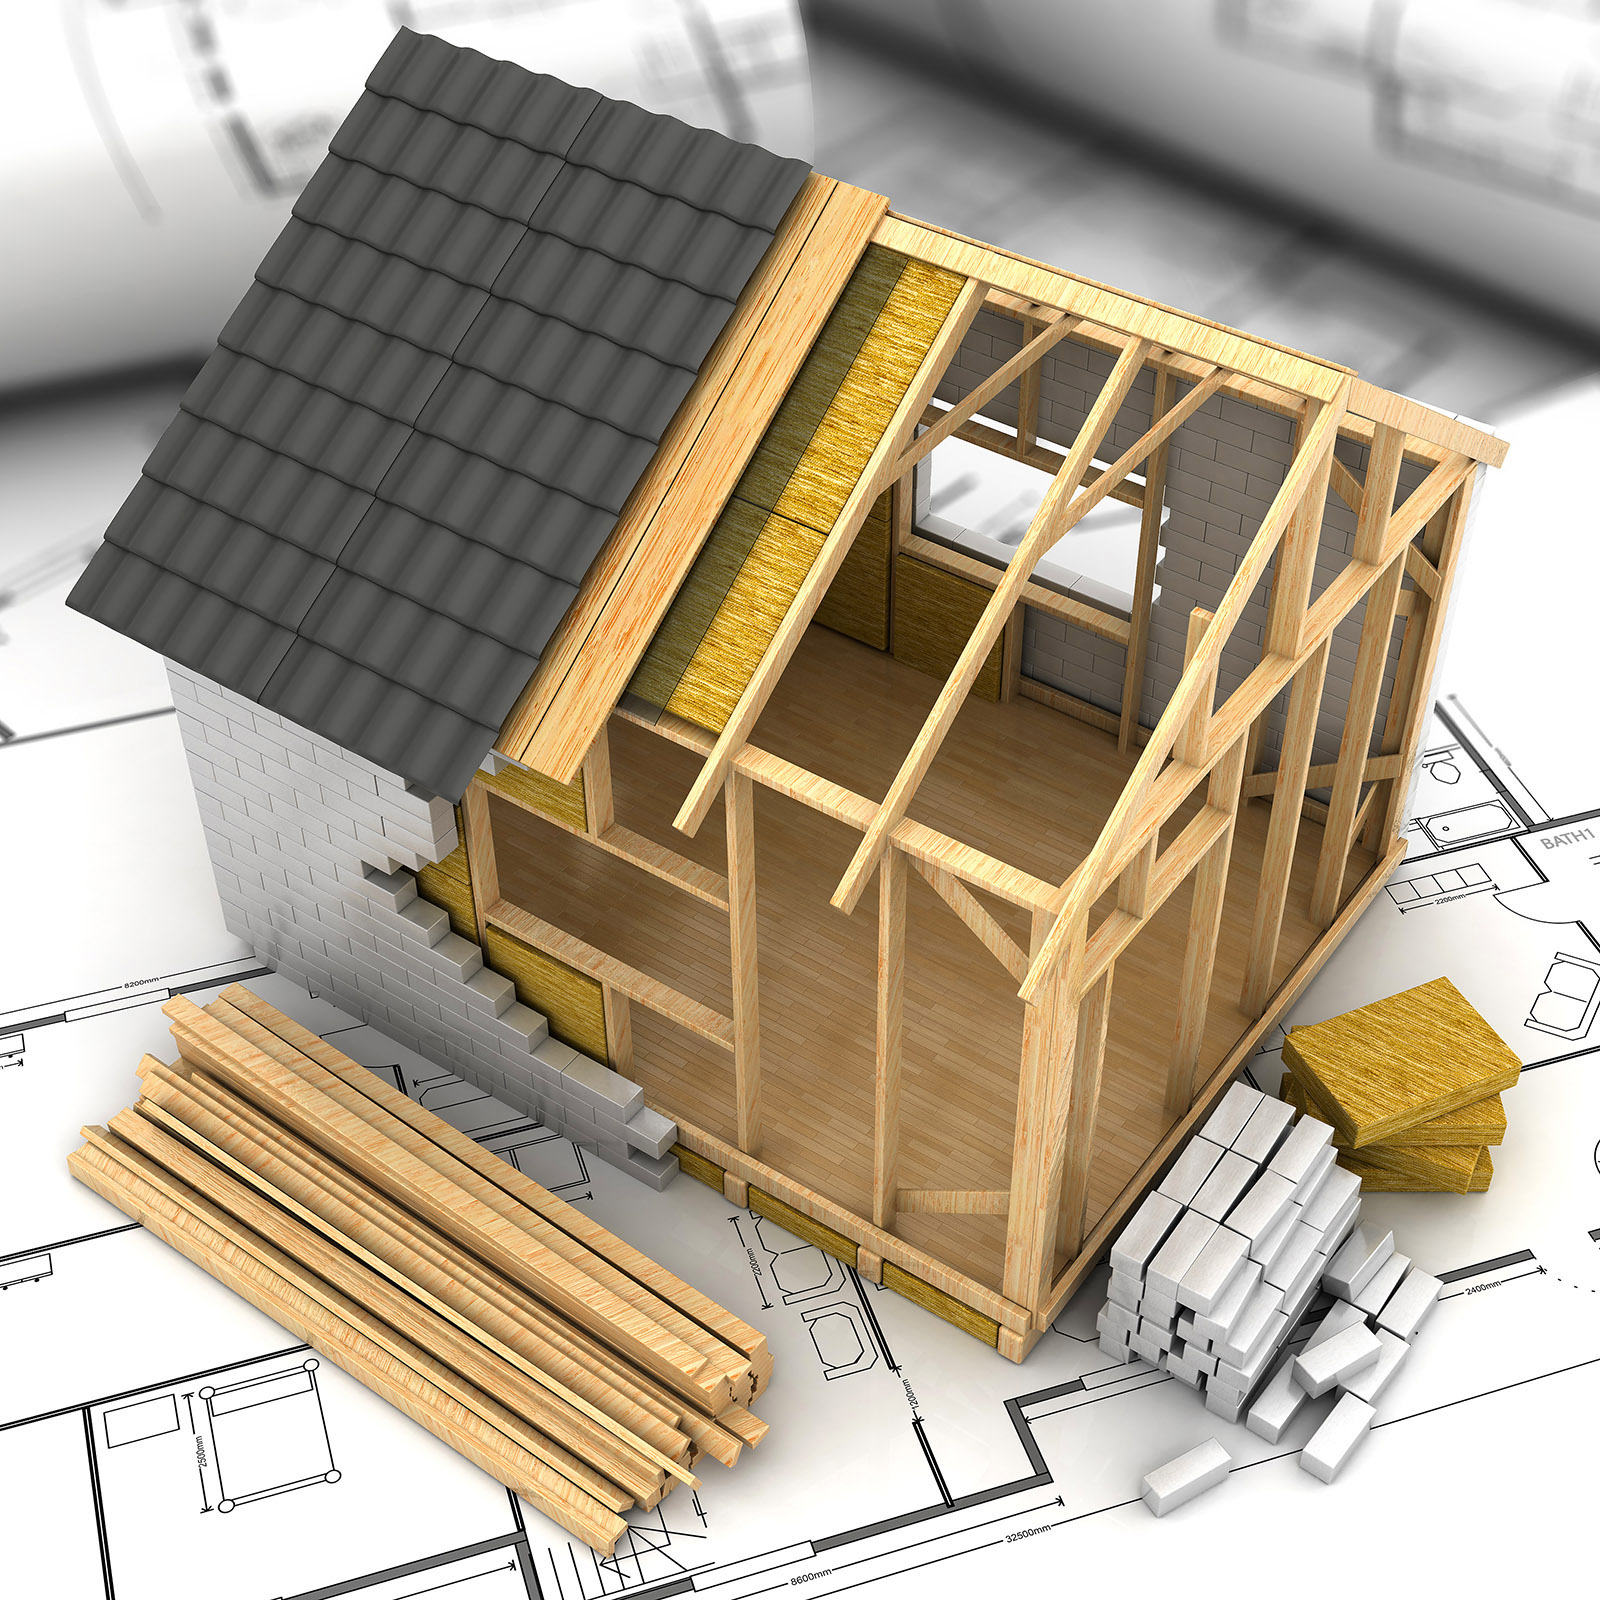 Here at Foremost Roofing we like forward planning… Having a roof plan is a vital stage for any new roof construction, and for any renovation, repair or extension work being performed on an existing roof.